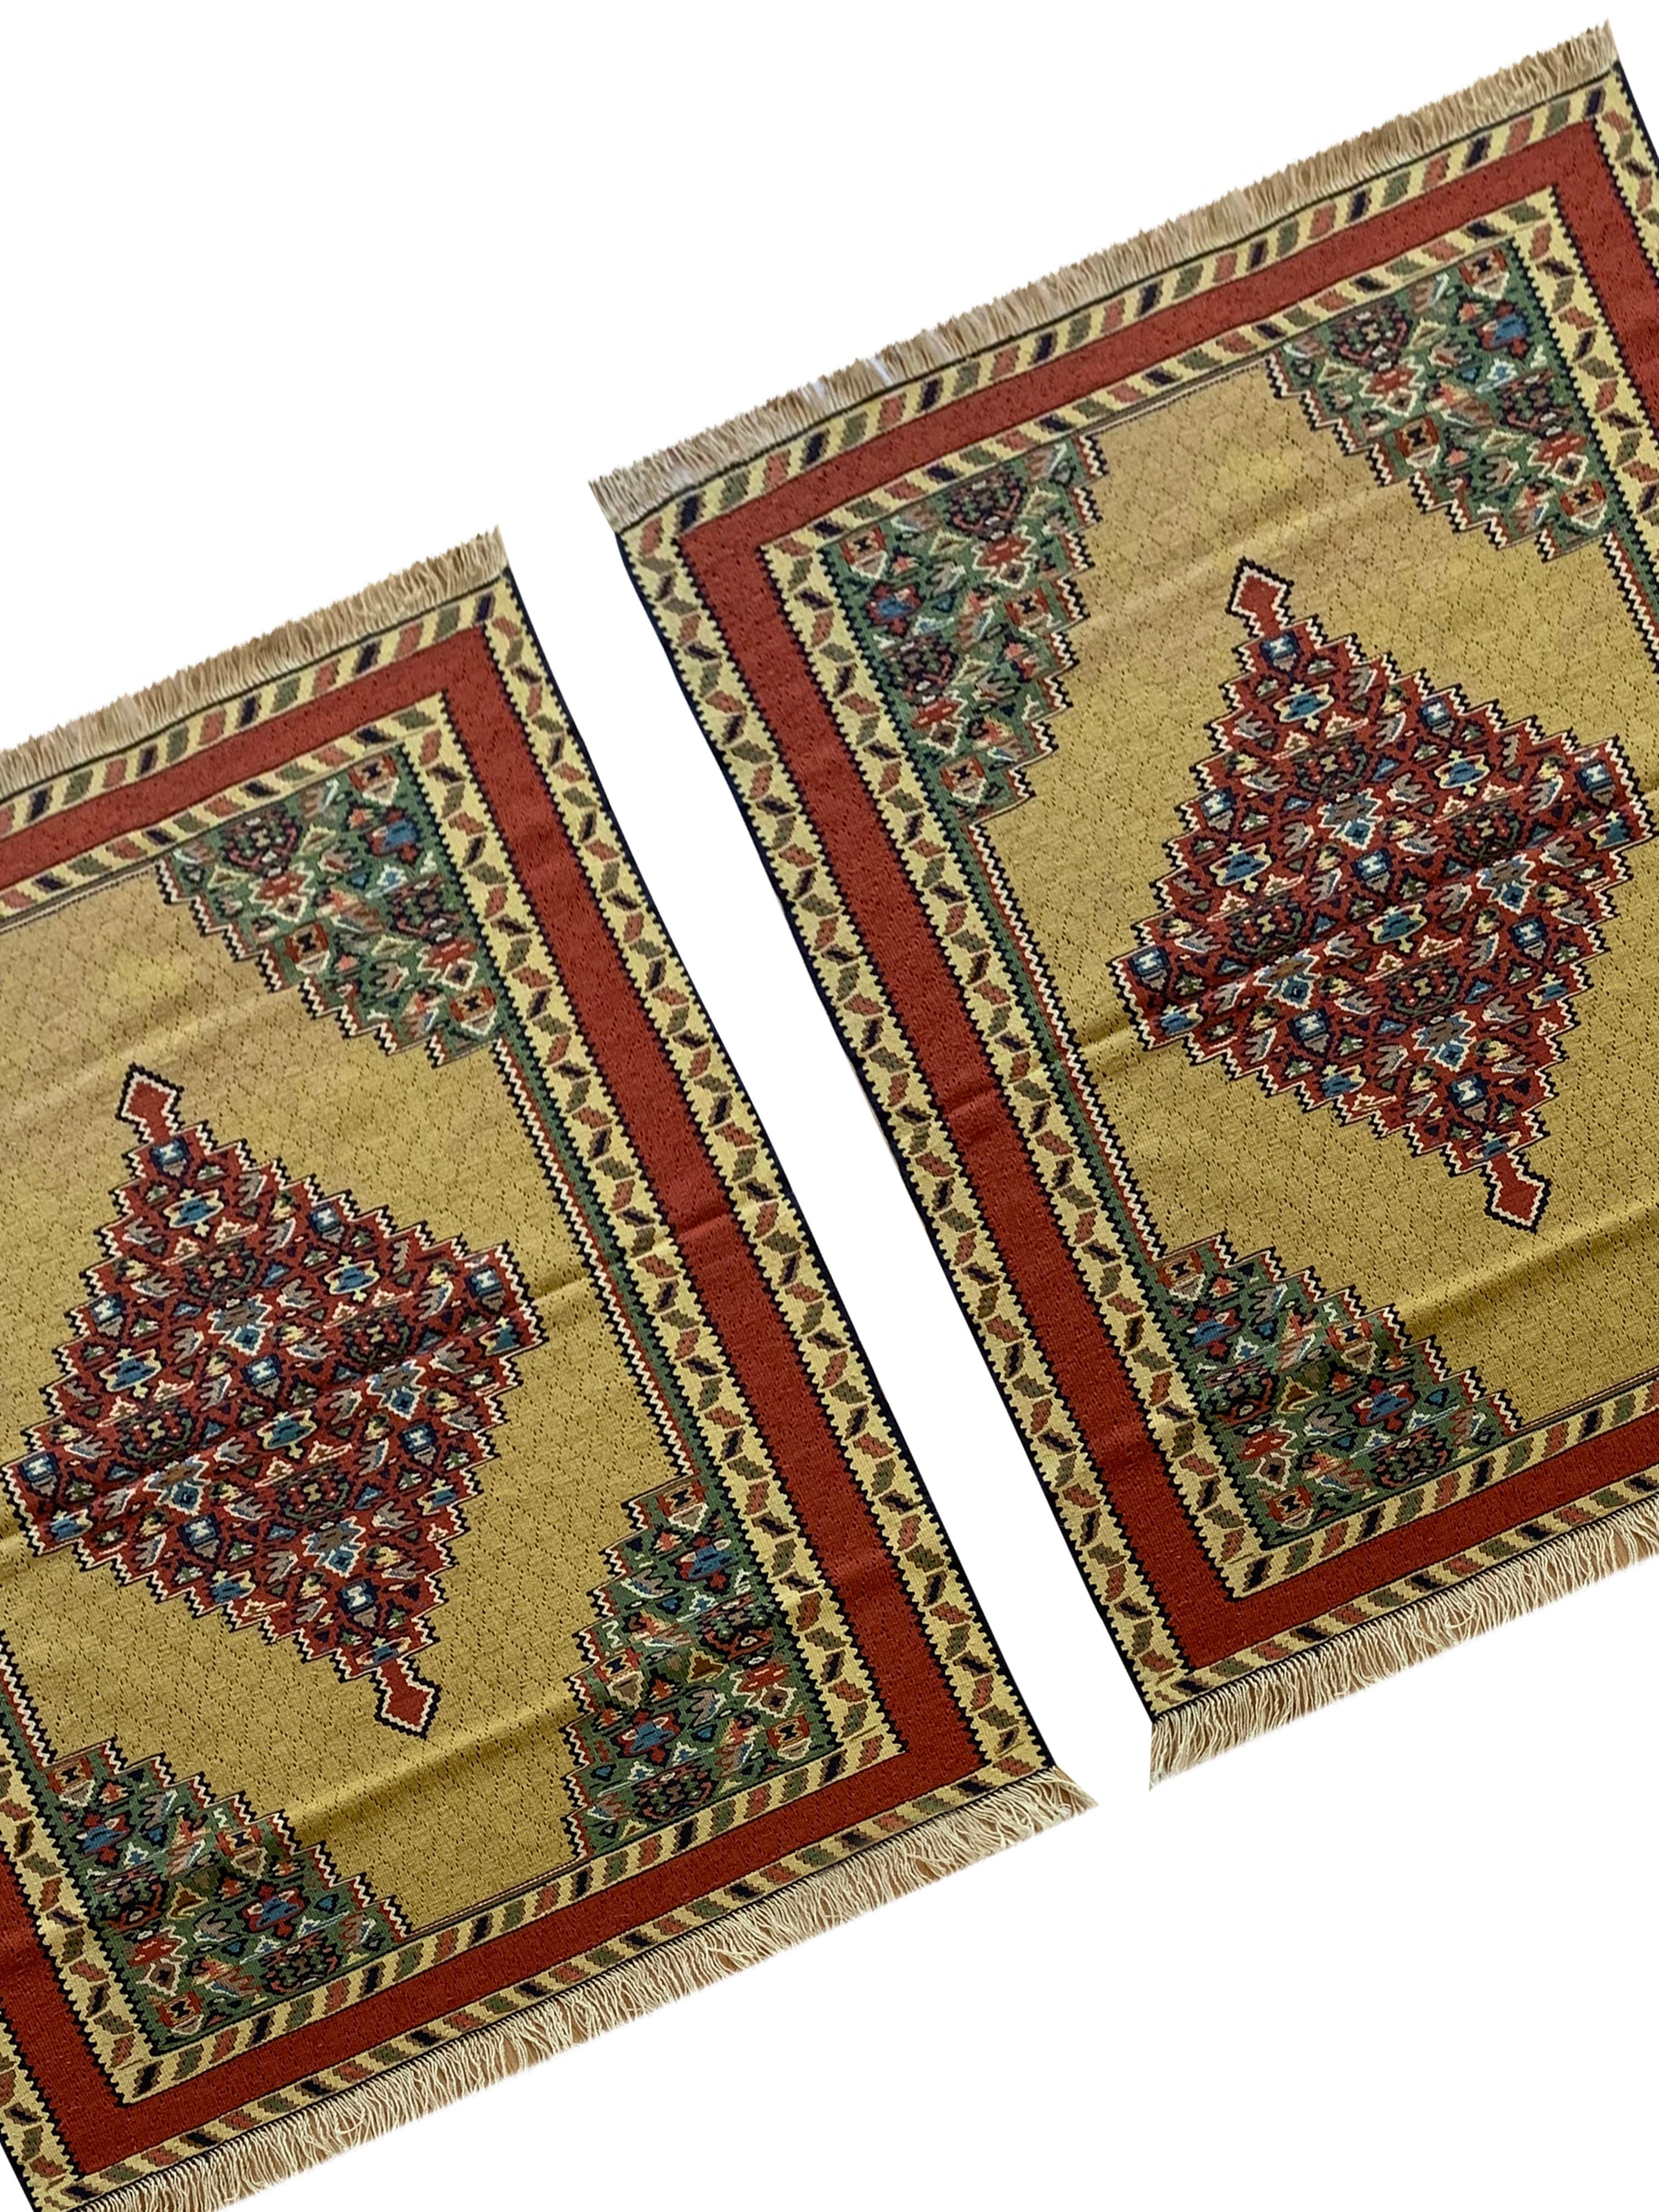 Vegetable Dyed Pair of Small Kilim Rugs Handwoven Oriental Geometric Area Rugs For Sale